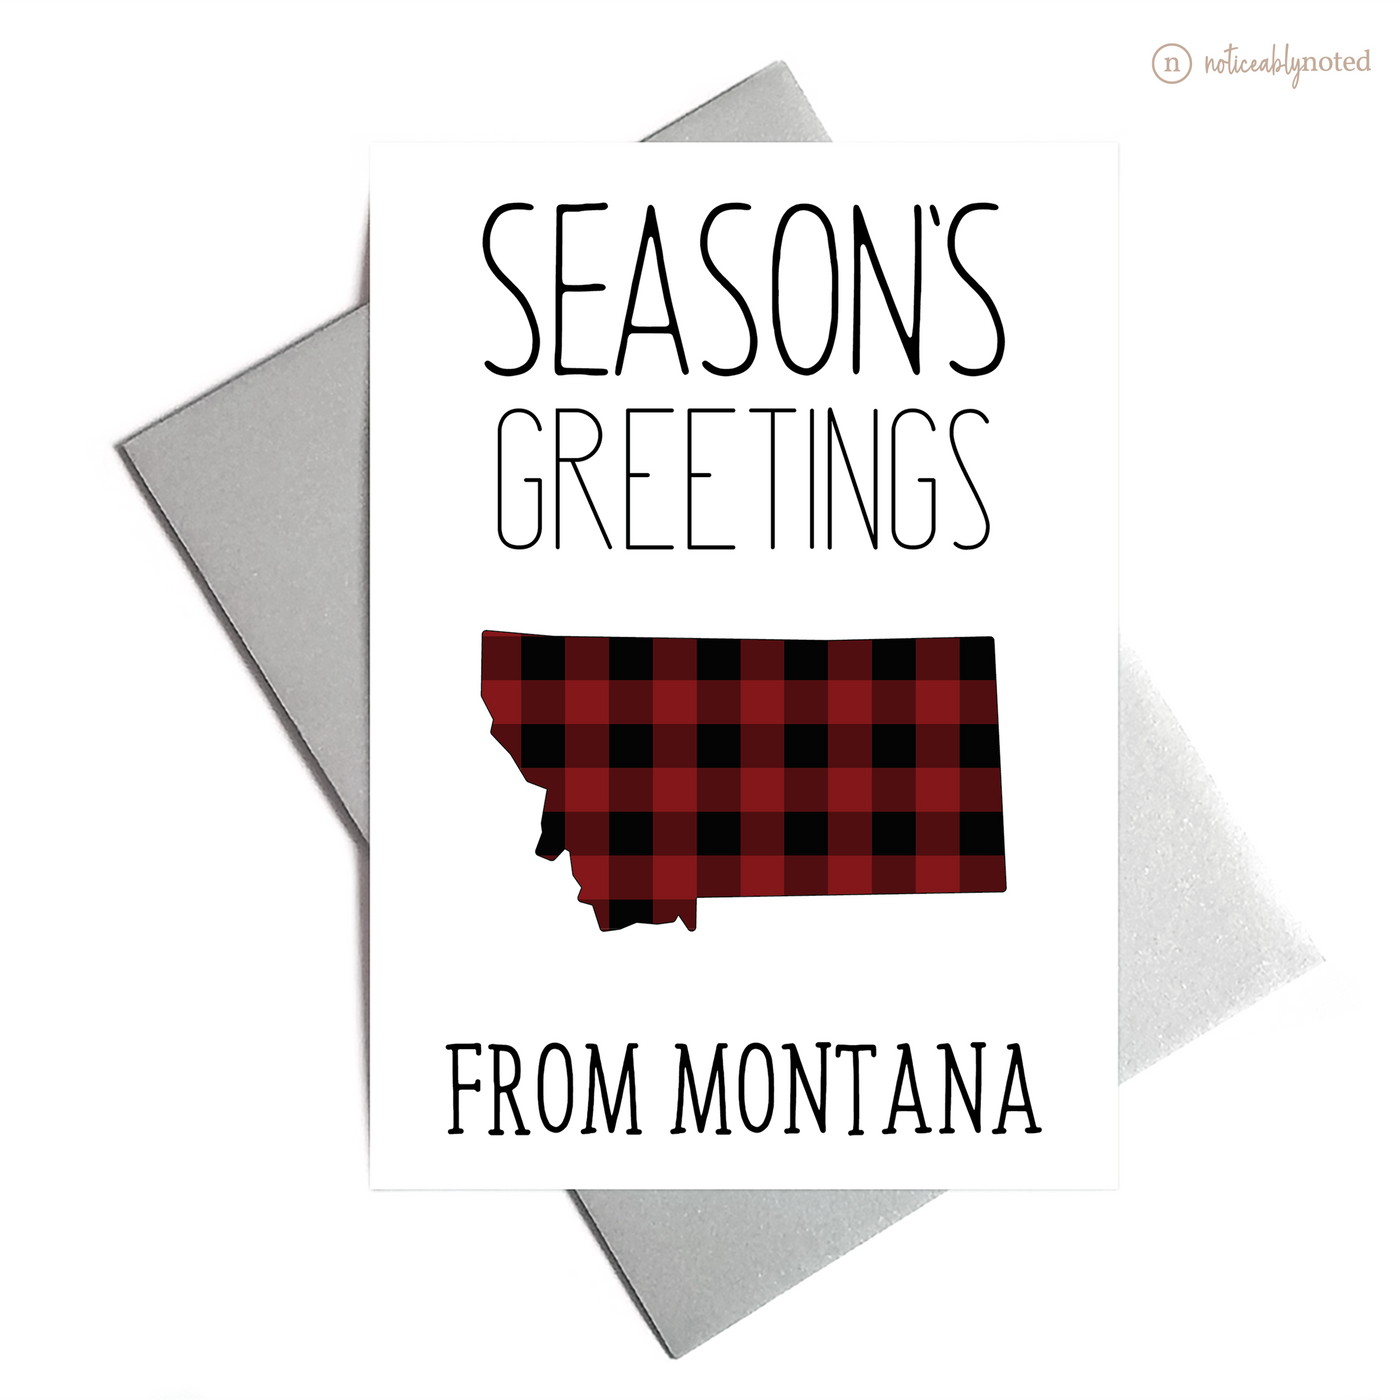 Montana Christmas Cards | Noticeably Noted